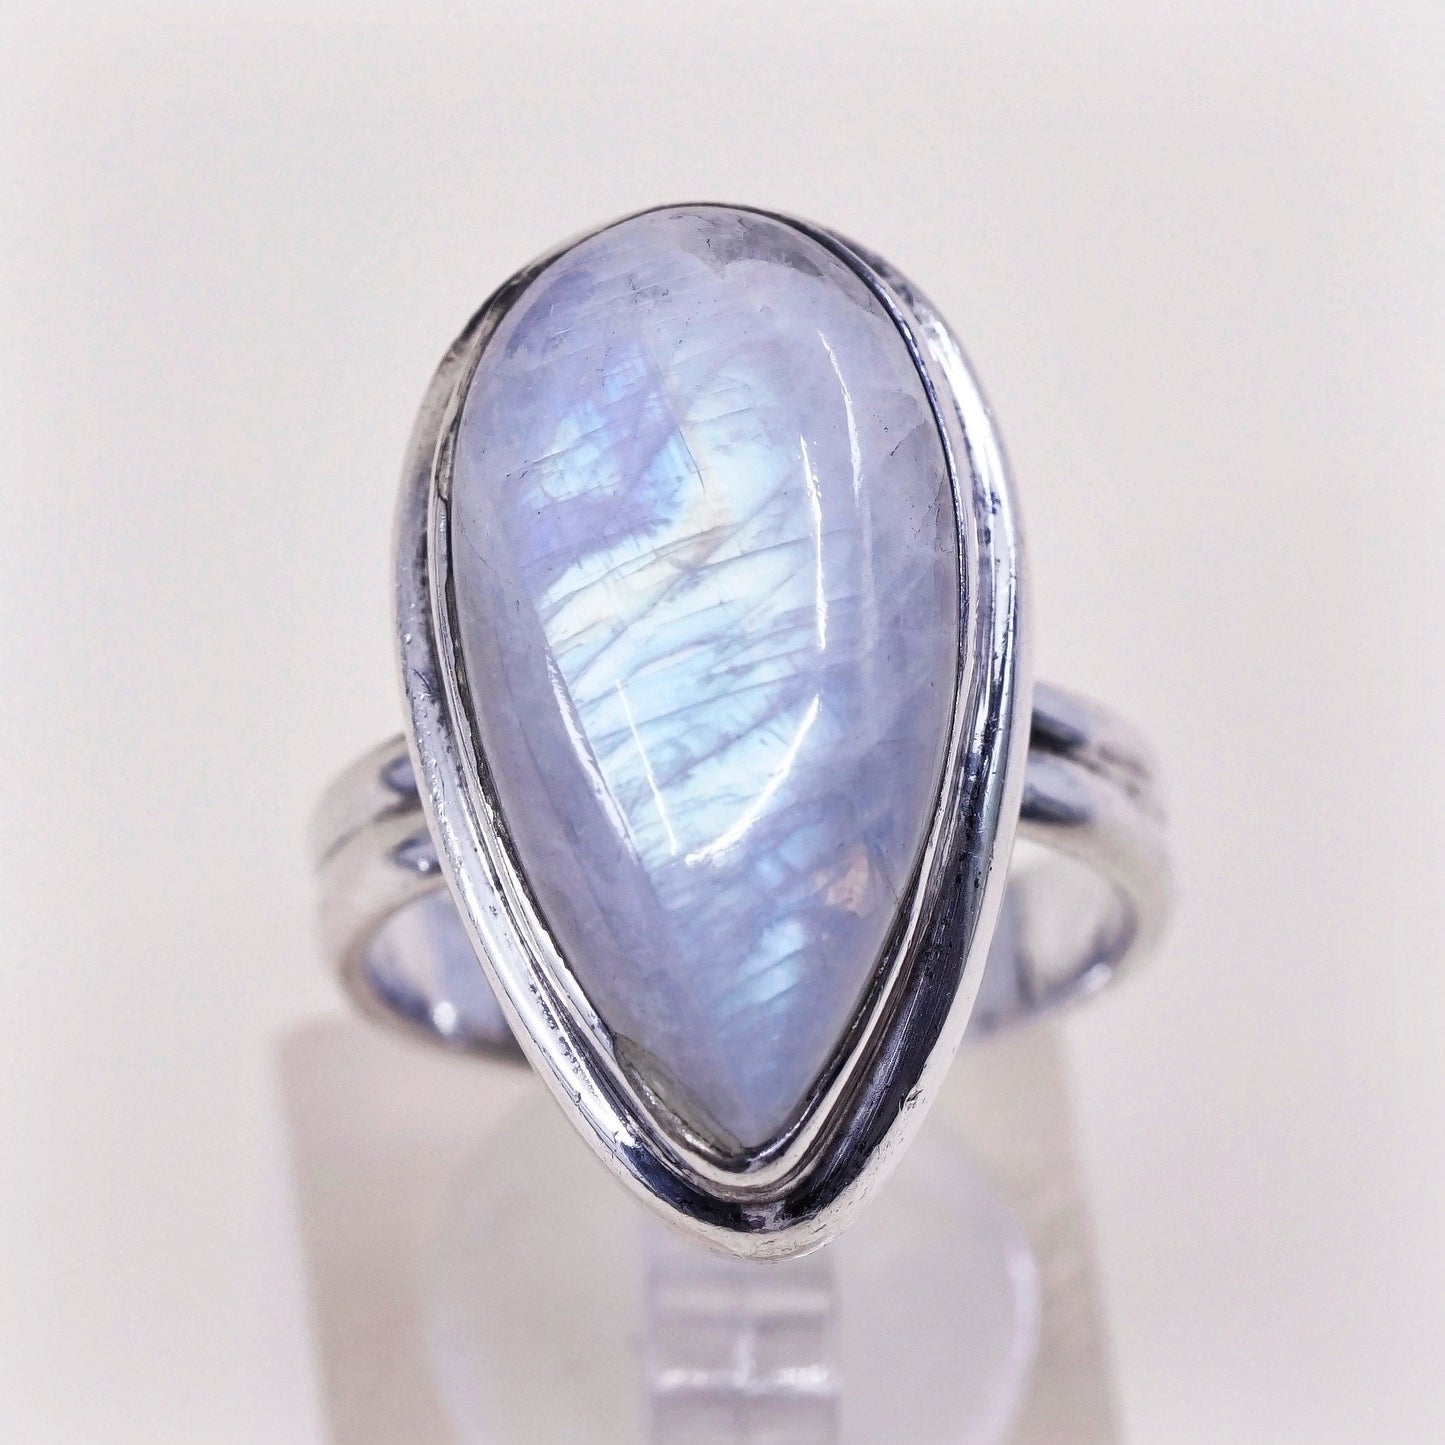 Size 9, vtg sterling silver handmade ring, 925 band with teardrop moonstone